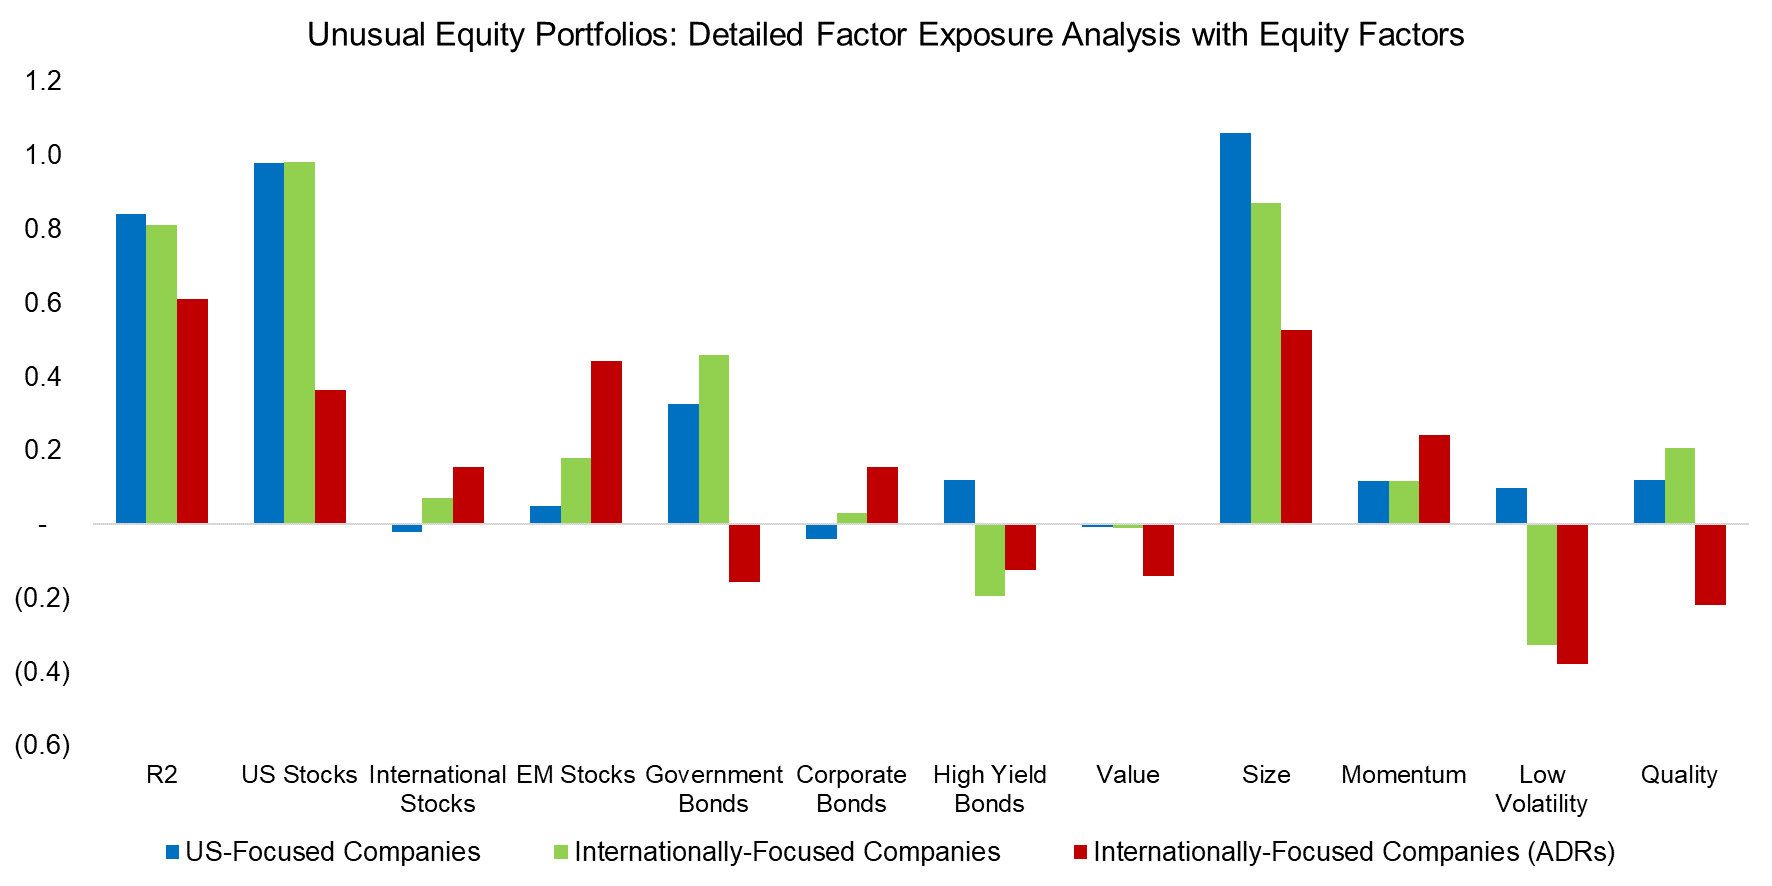 Unusual Equity Portfolios Detailed Factor Exposure Analysis with Equity Factors